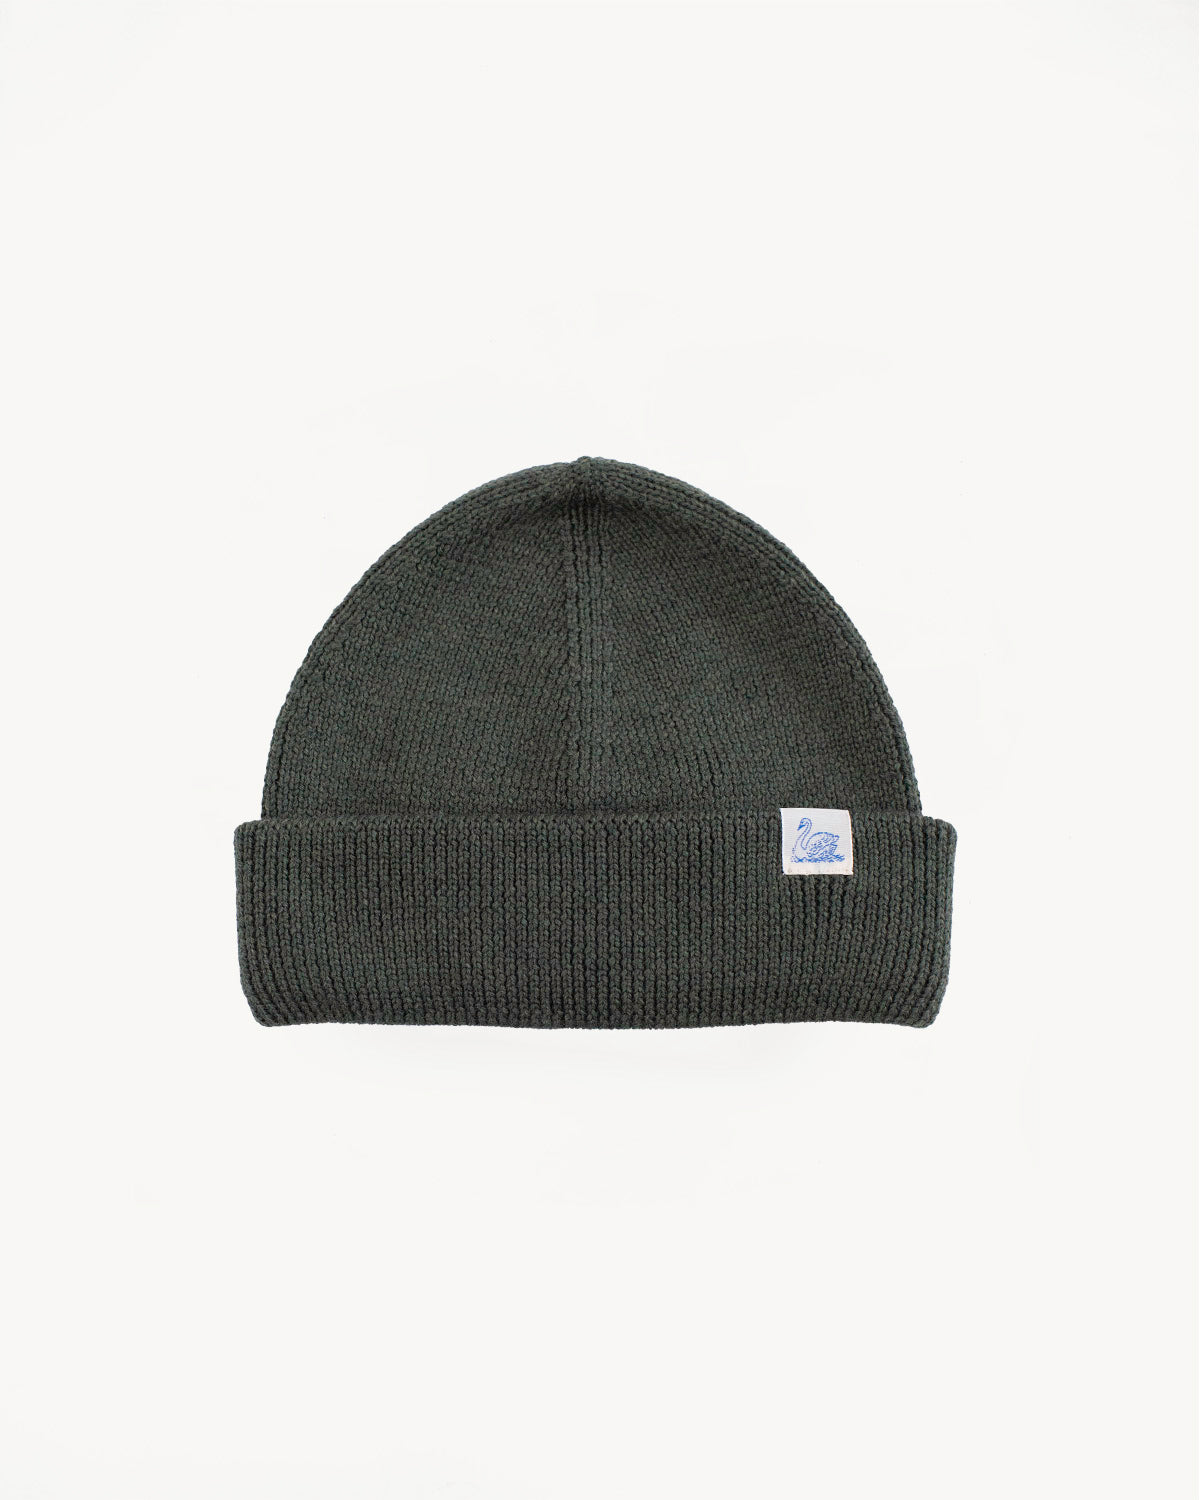 MWBN05.40 - Ribbed Structure Watch Cap Merino Wool  - Army